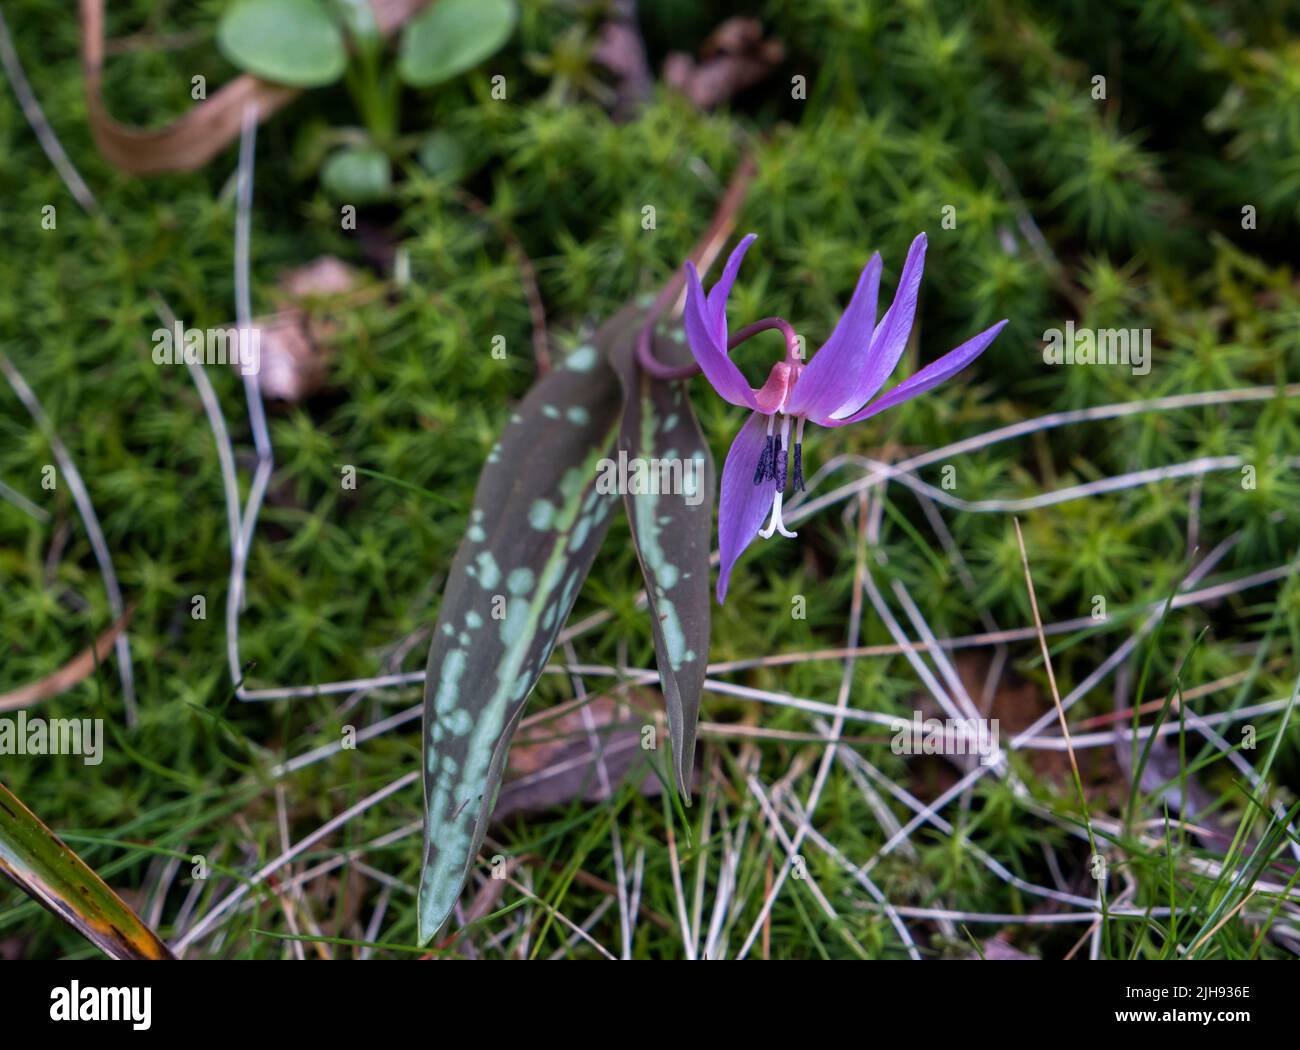 Dogtooth violet (Erythronium dens-canis) springtime flower and brown spotted leaves Stock Photo